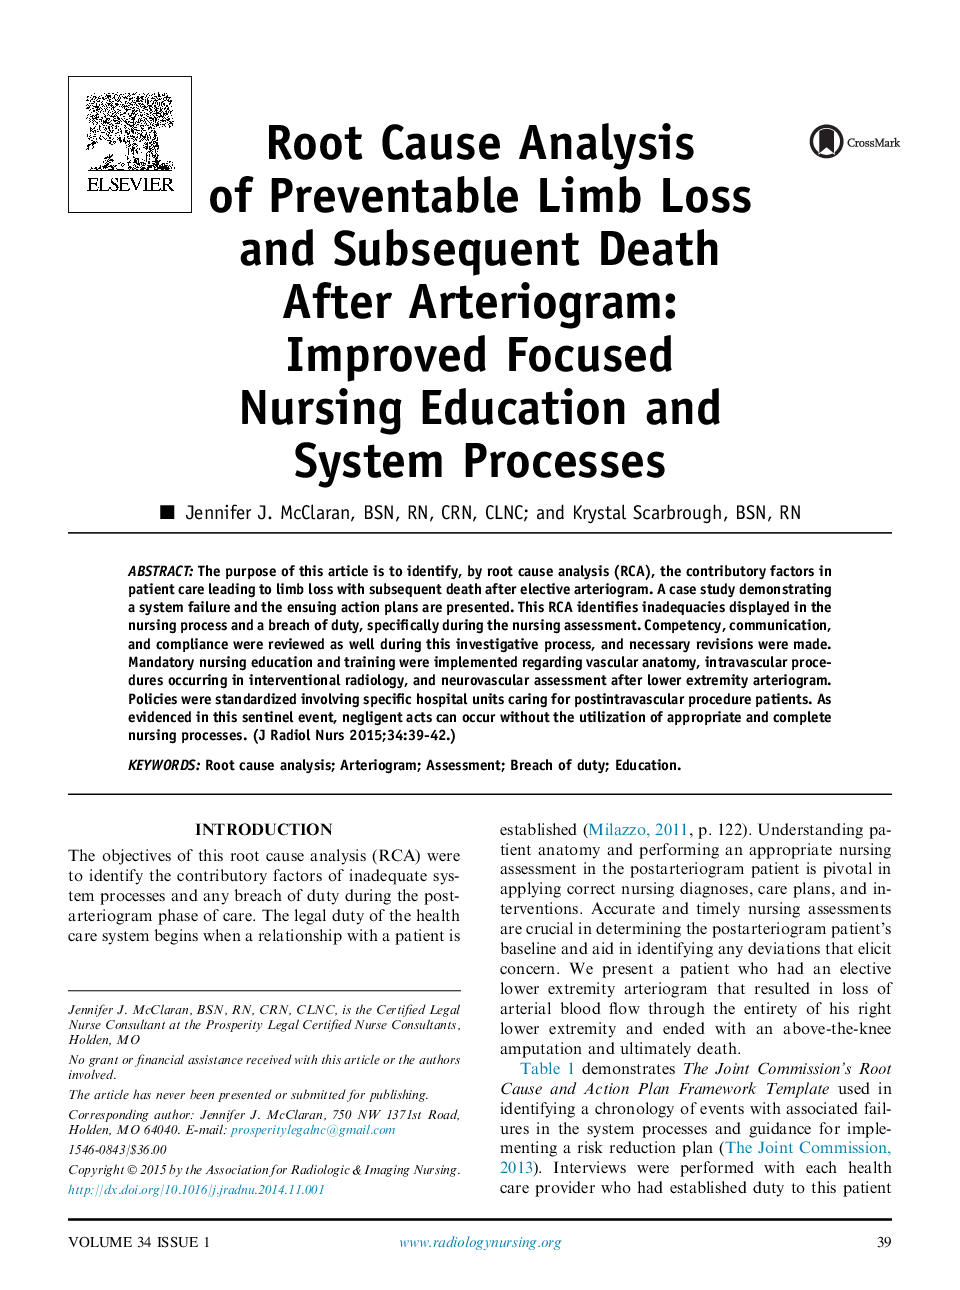 Root Cause Analysis of Preventable Limb Loss and Subsequent Death After Arteriogram: Improved Focused Nursing Education and System Processes 